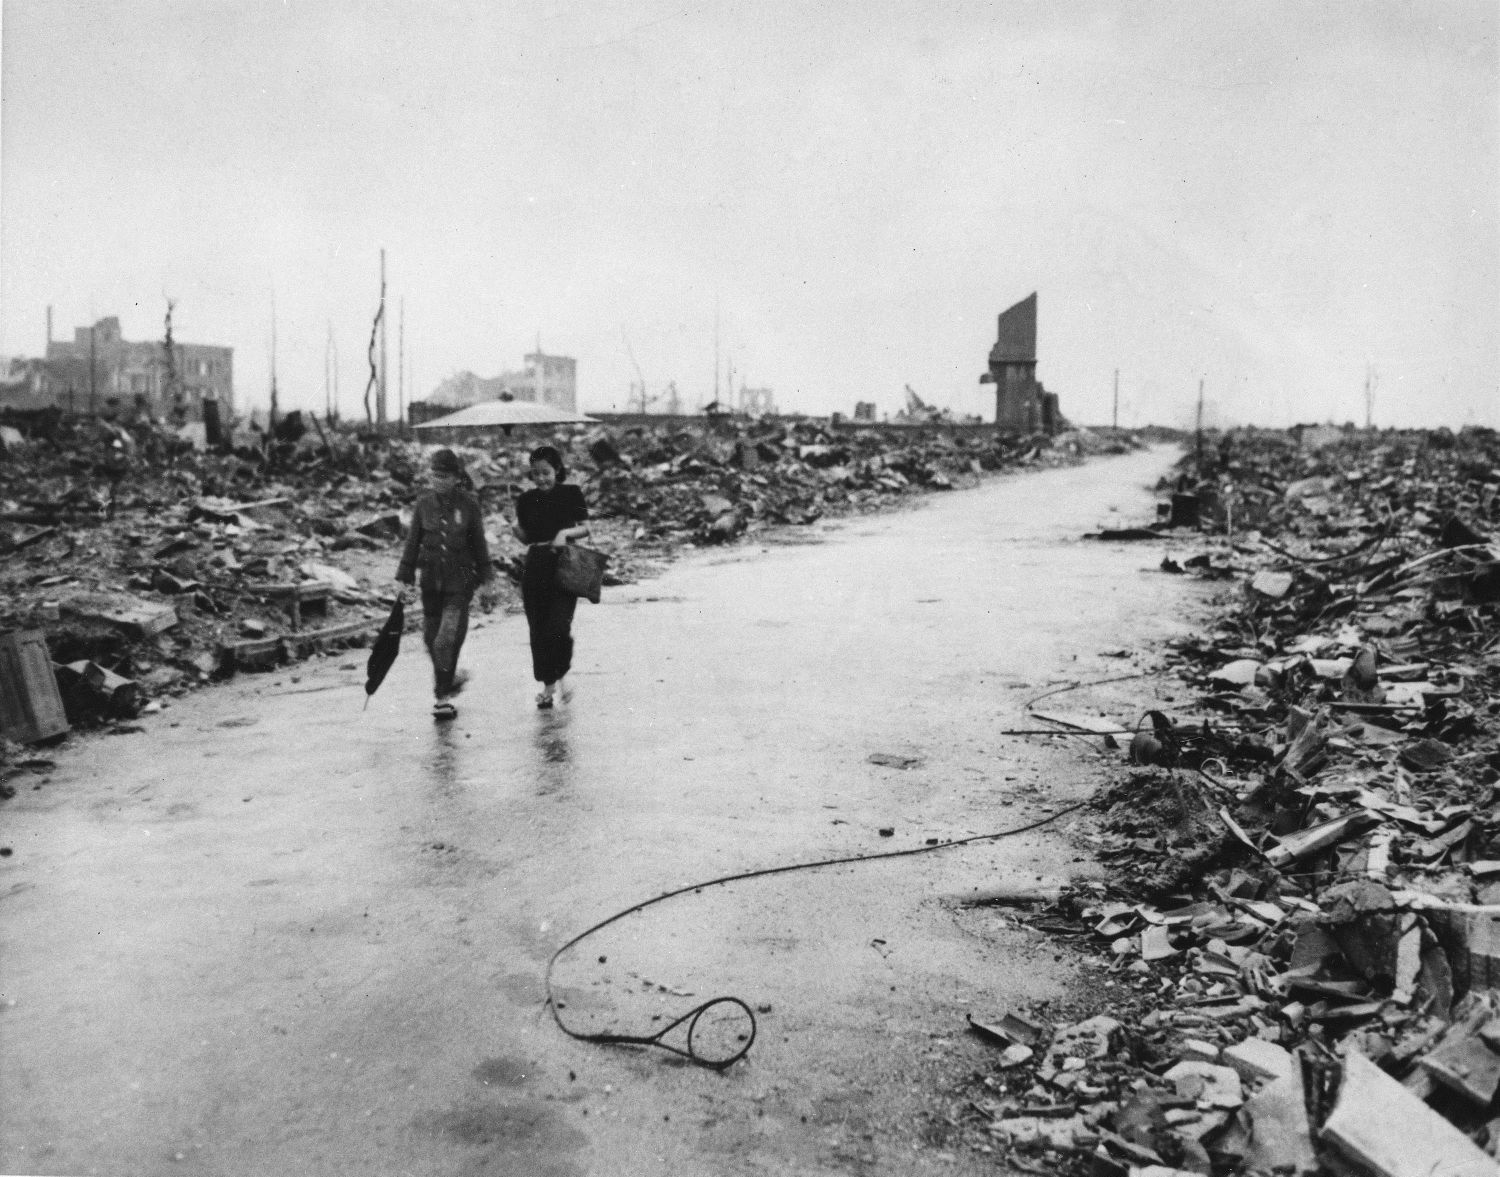 hiroshima atomic bomb aftermath pictures